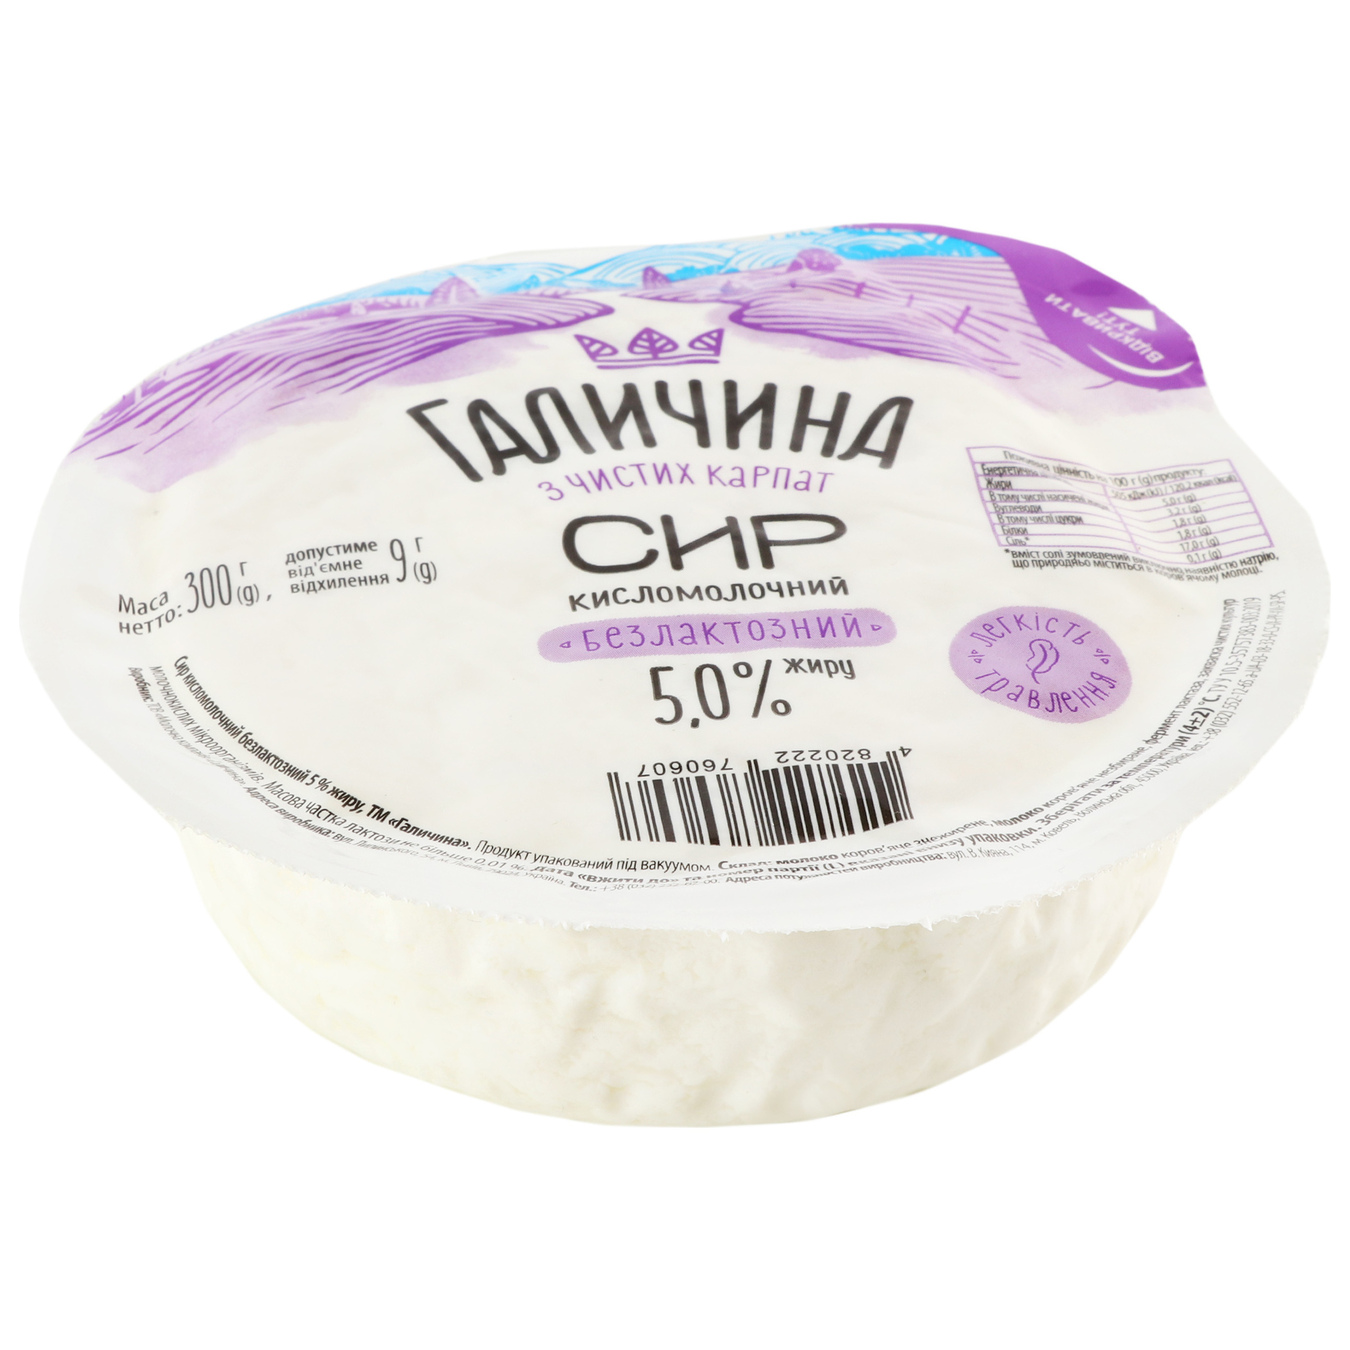 Galicia Cottage cheese lactose-free 5% 300g 2